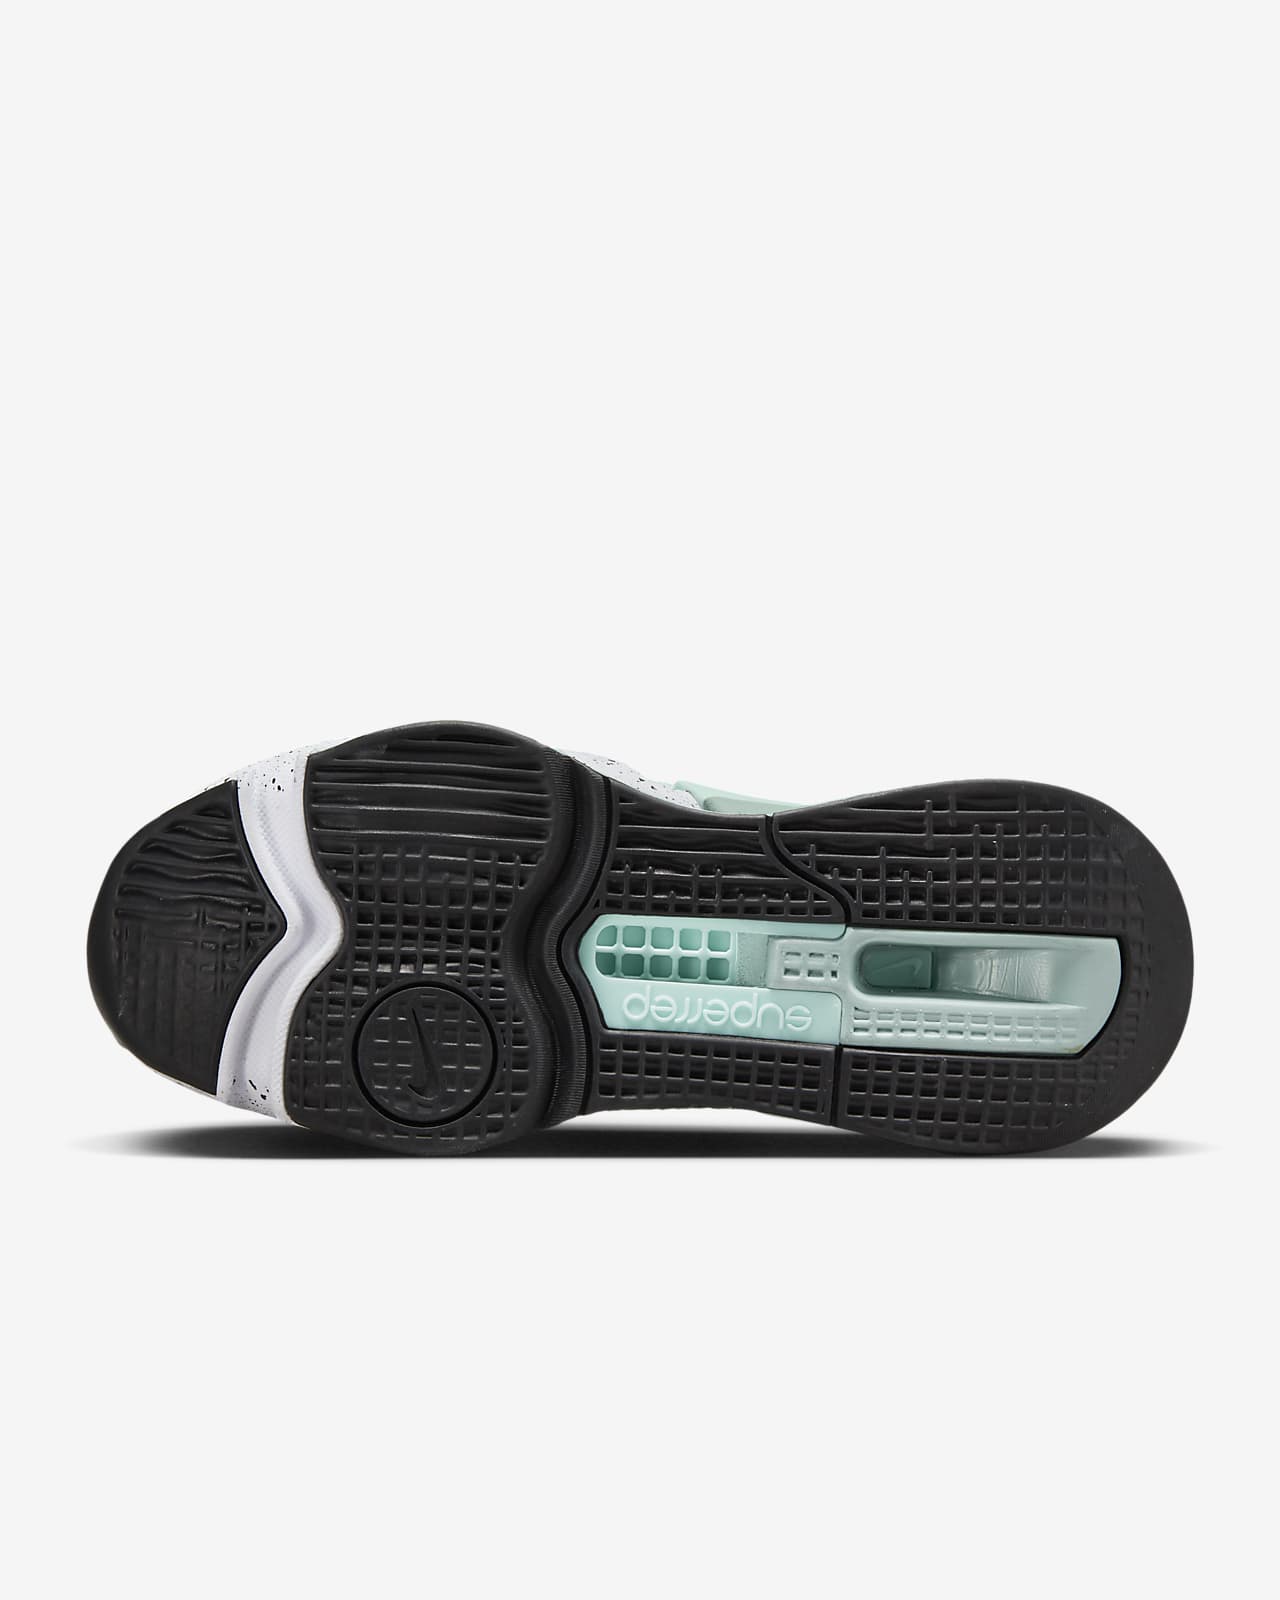 Nike Zoom SuperRep 4 Next Nature Women's Workout Shoes. Nike ID